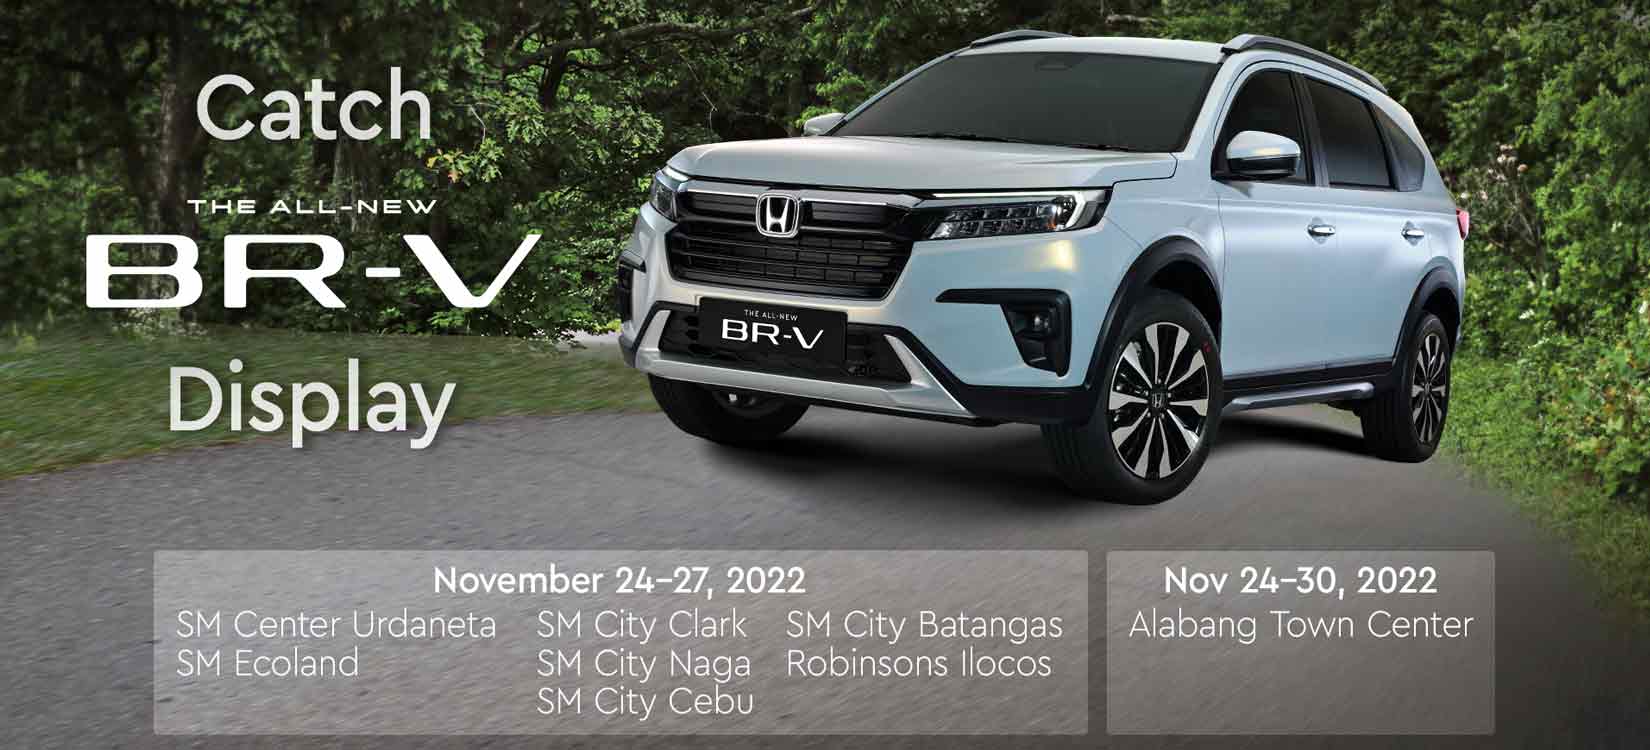 Check the All-New Honda BR-V at a mall near you from November 24 to 27